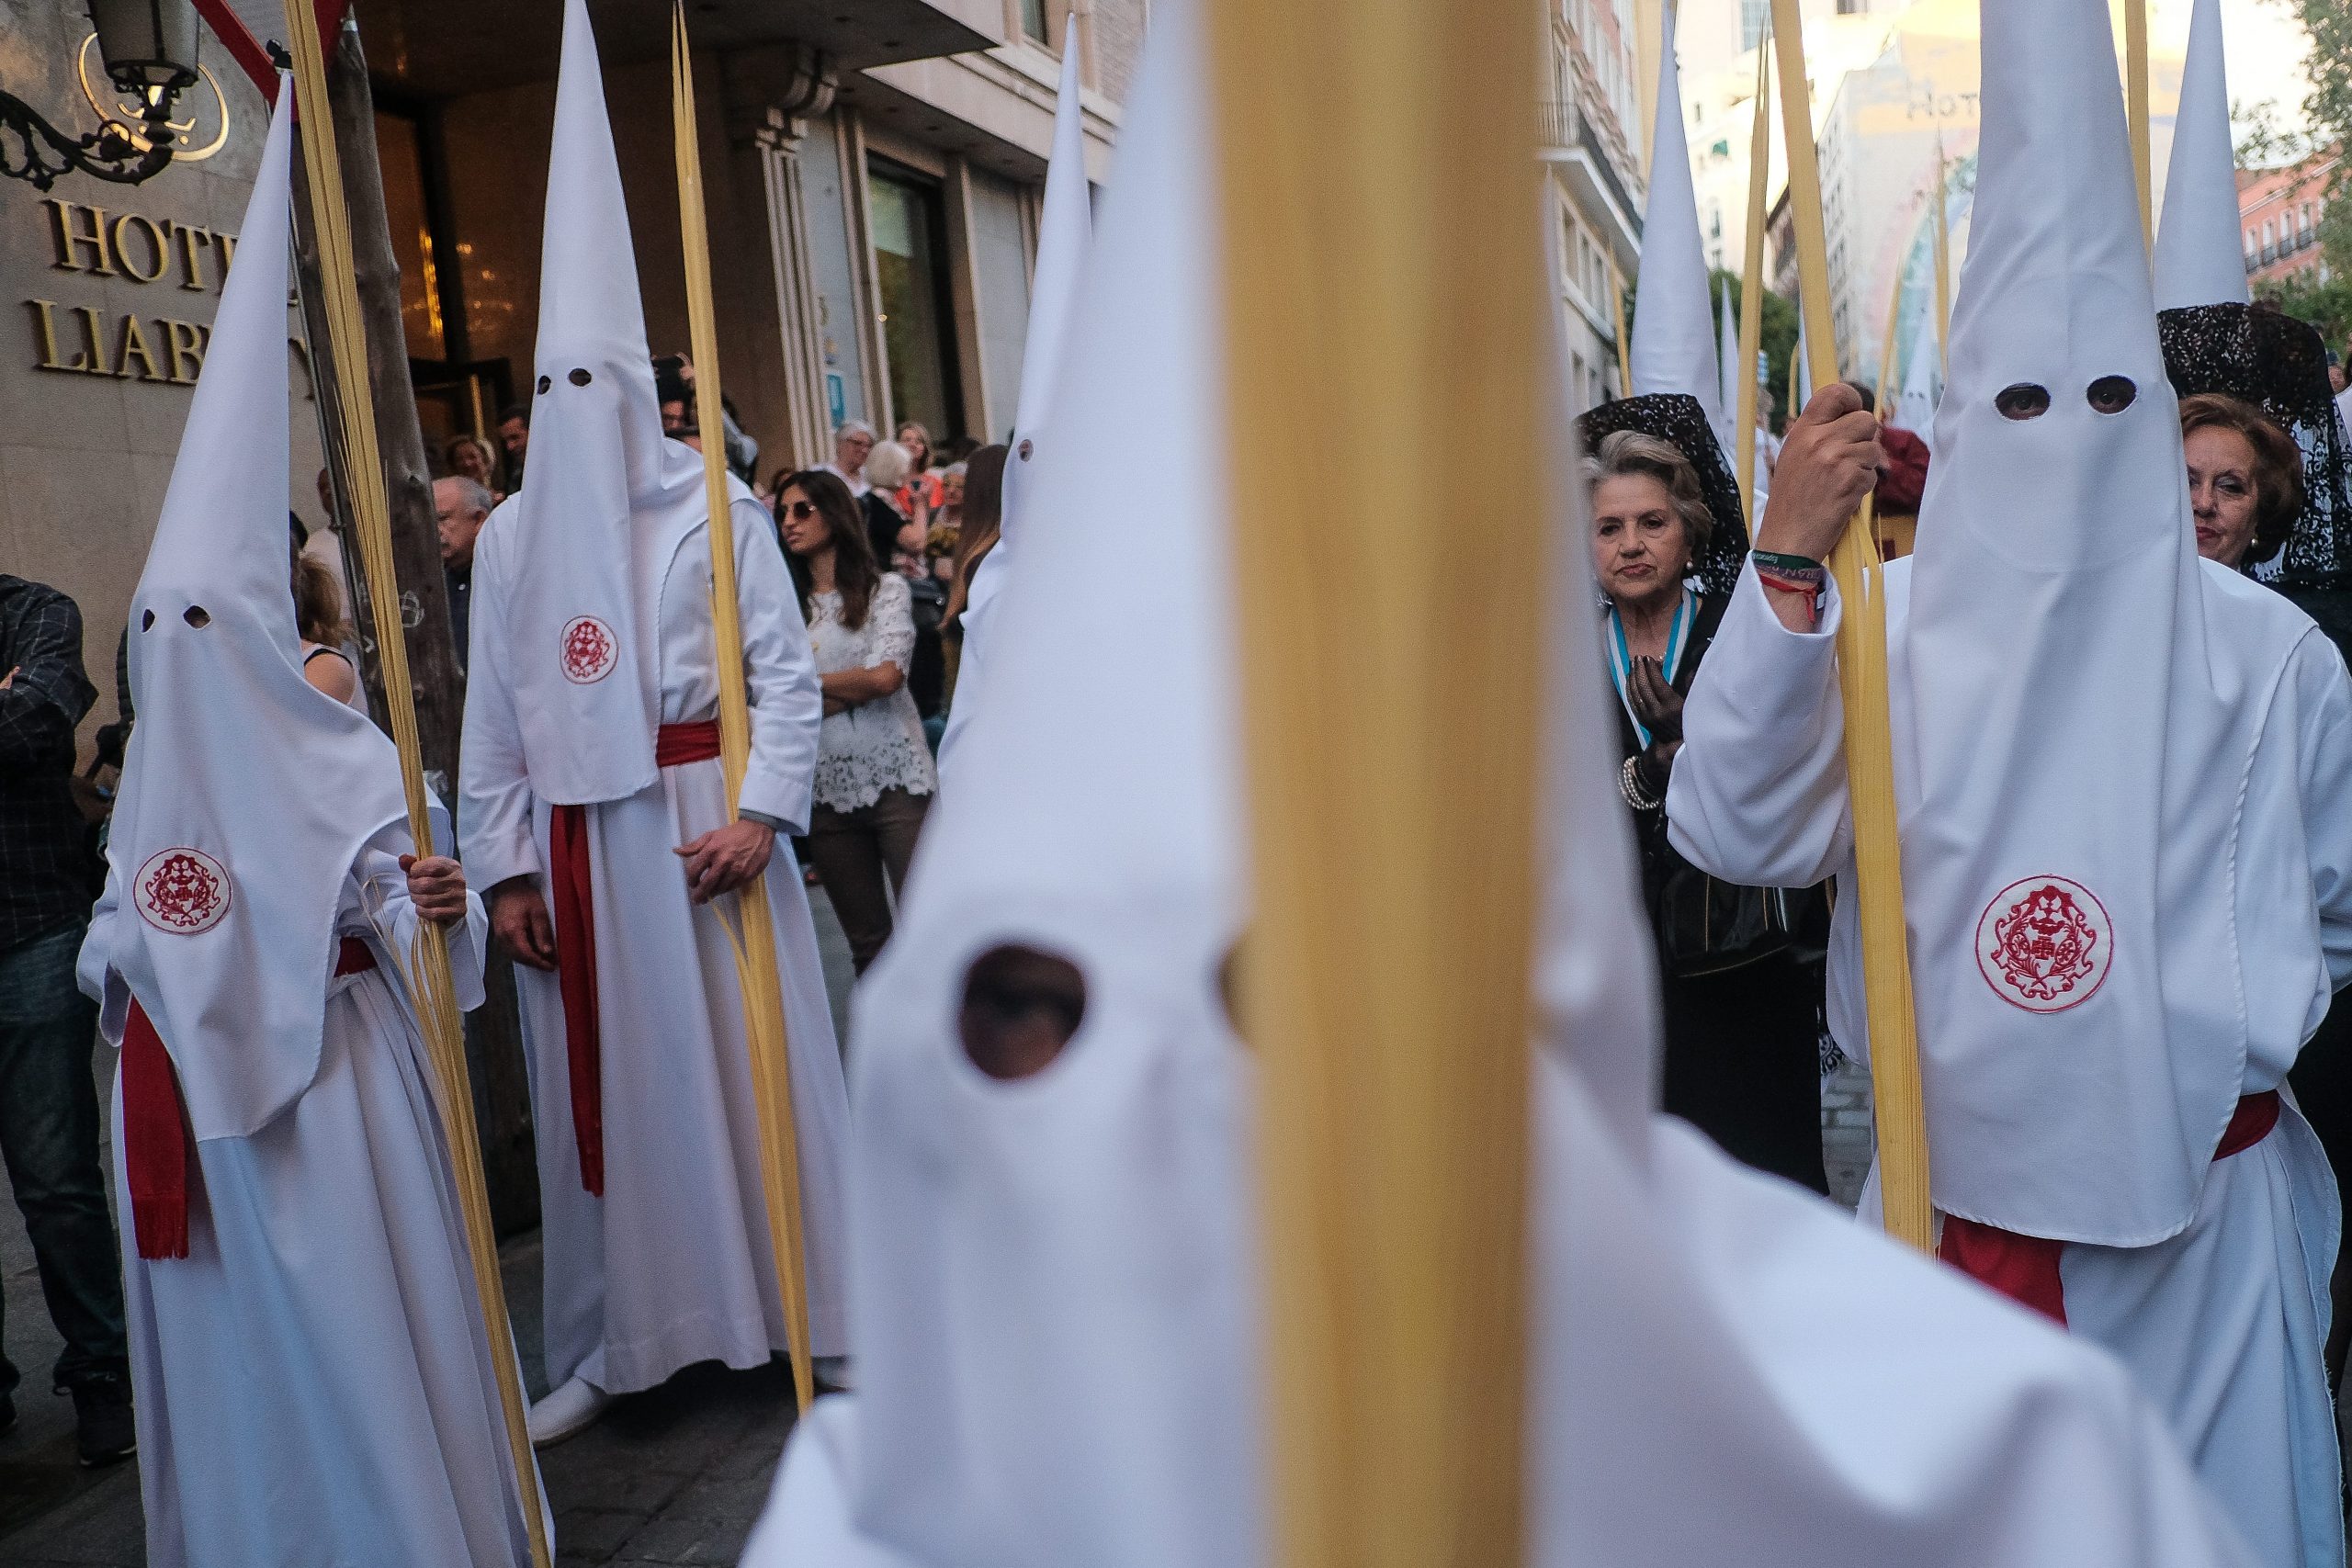 KKK costumes spotted at carnival in Switzerland prompt